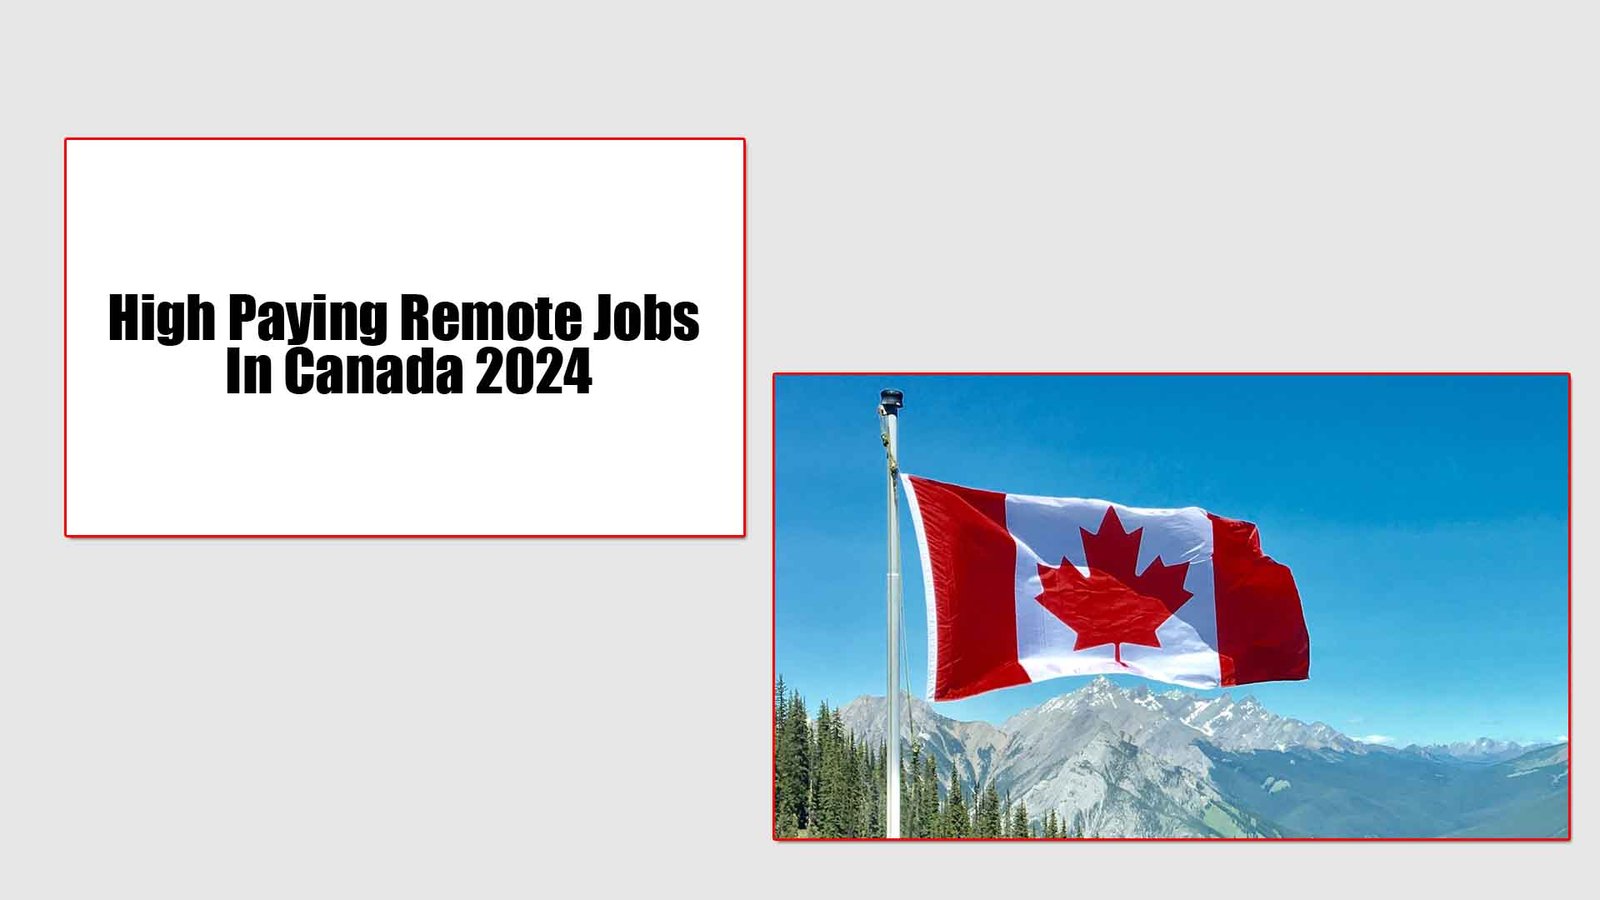 High Paying Remote Jobs In Canada 2024